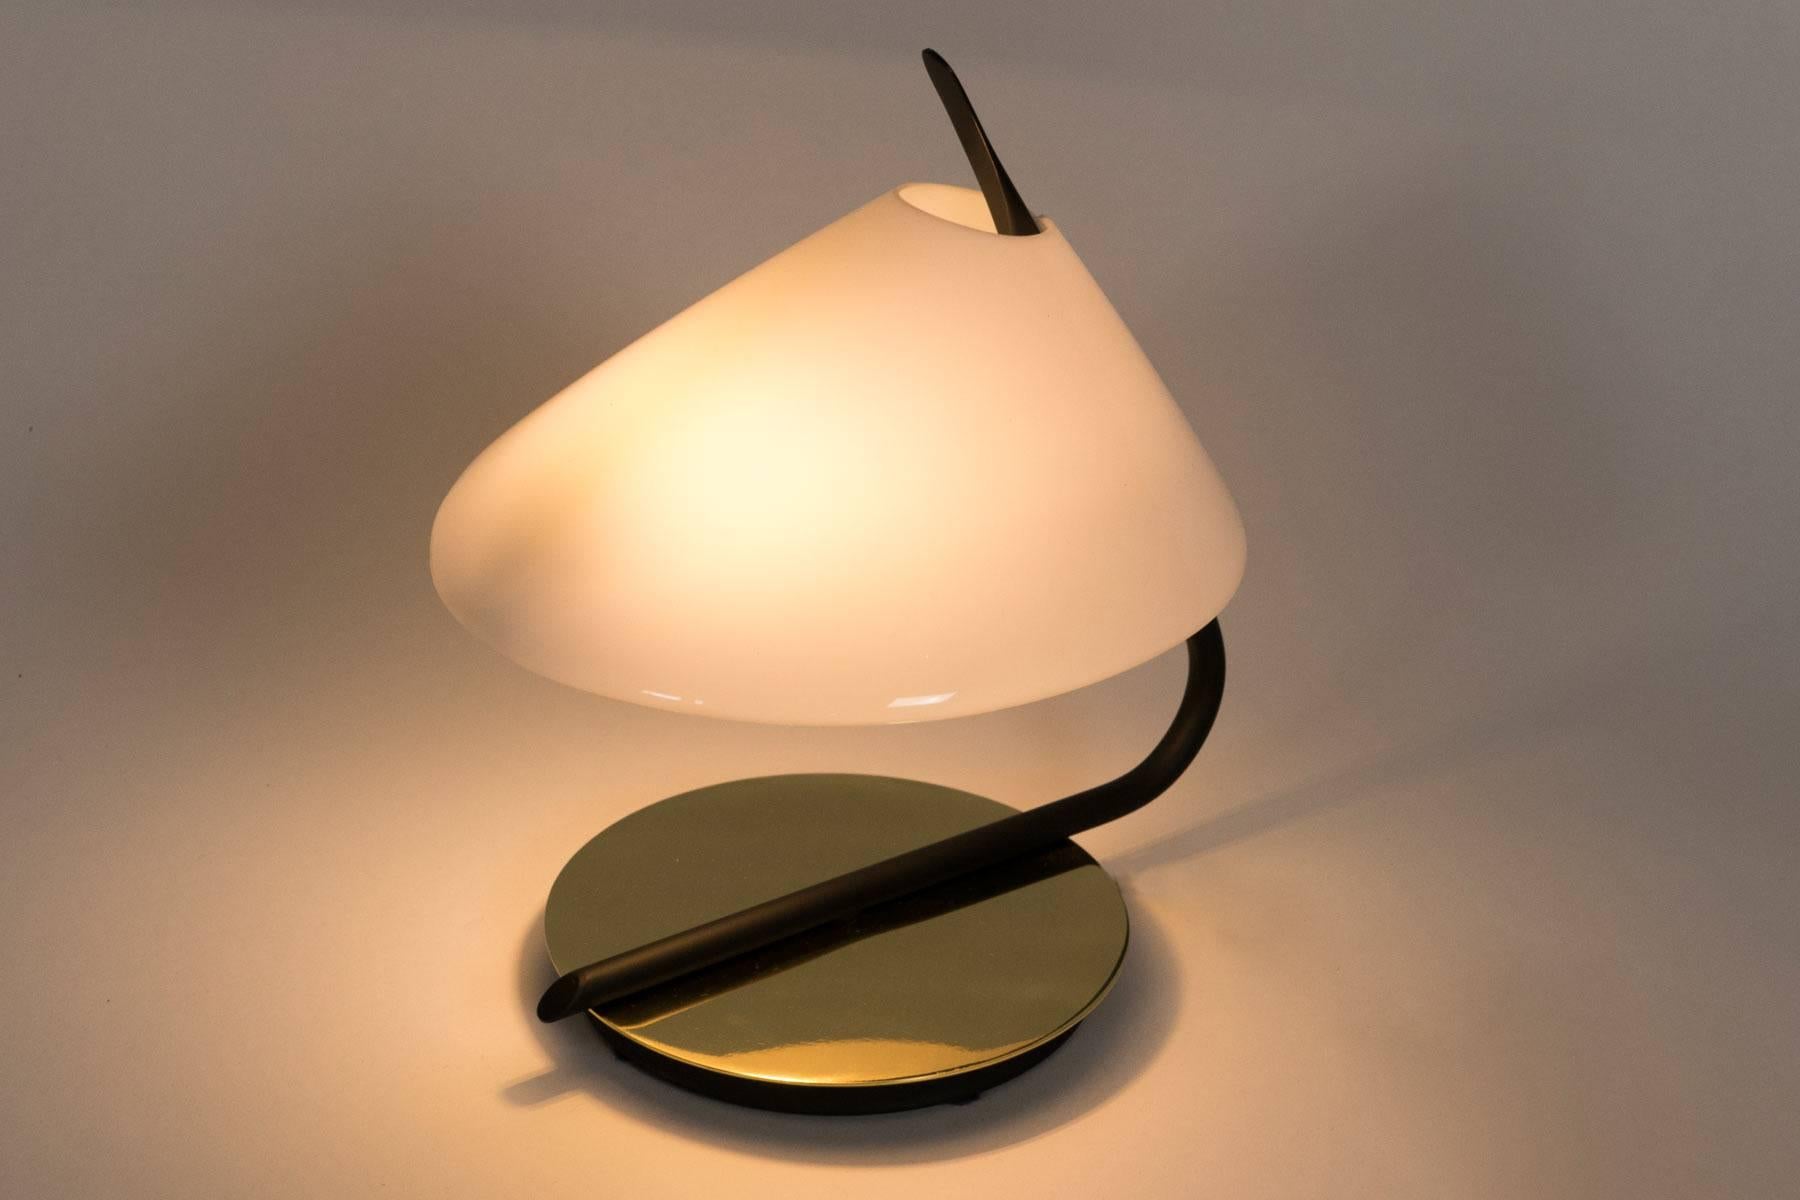 This small-scale lamp enhances shelves, small side tables, or it fits about anywhere. The soft light which is diffused by the acrylic shade is accented by the reflection from the brass base. Lamp uses one candelabra based bulb. Max wattage 25.